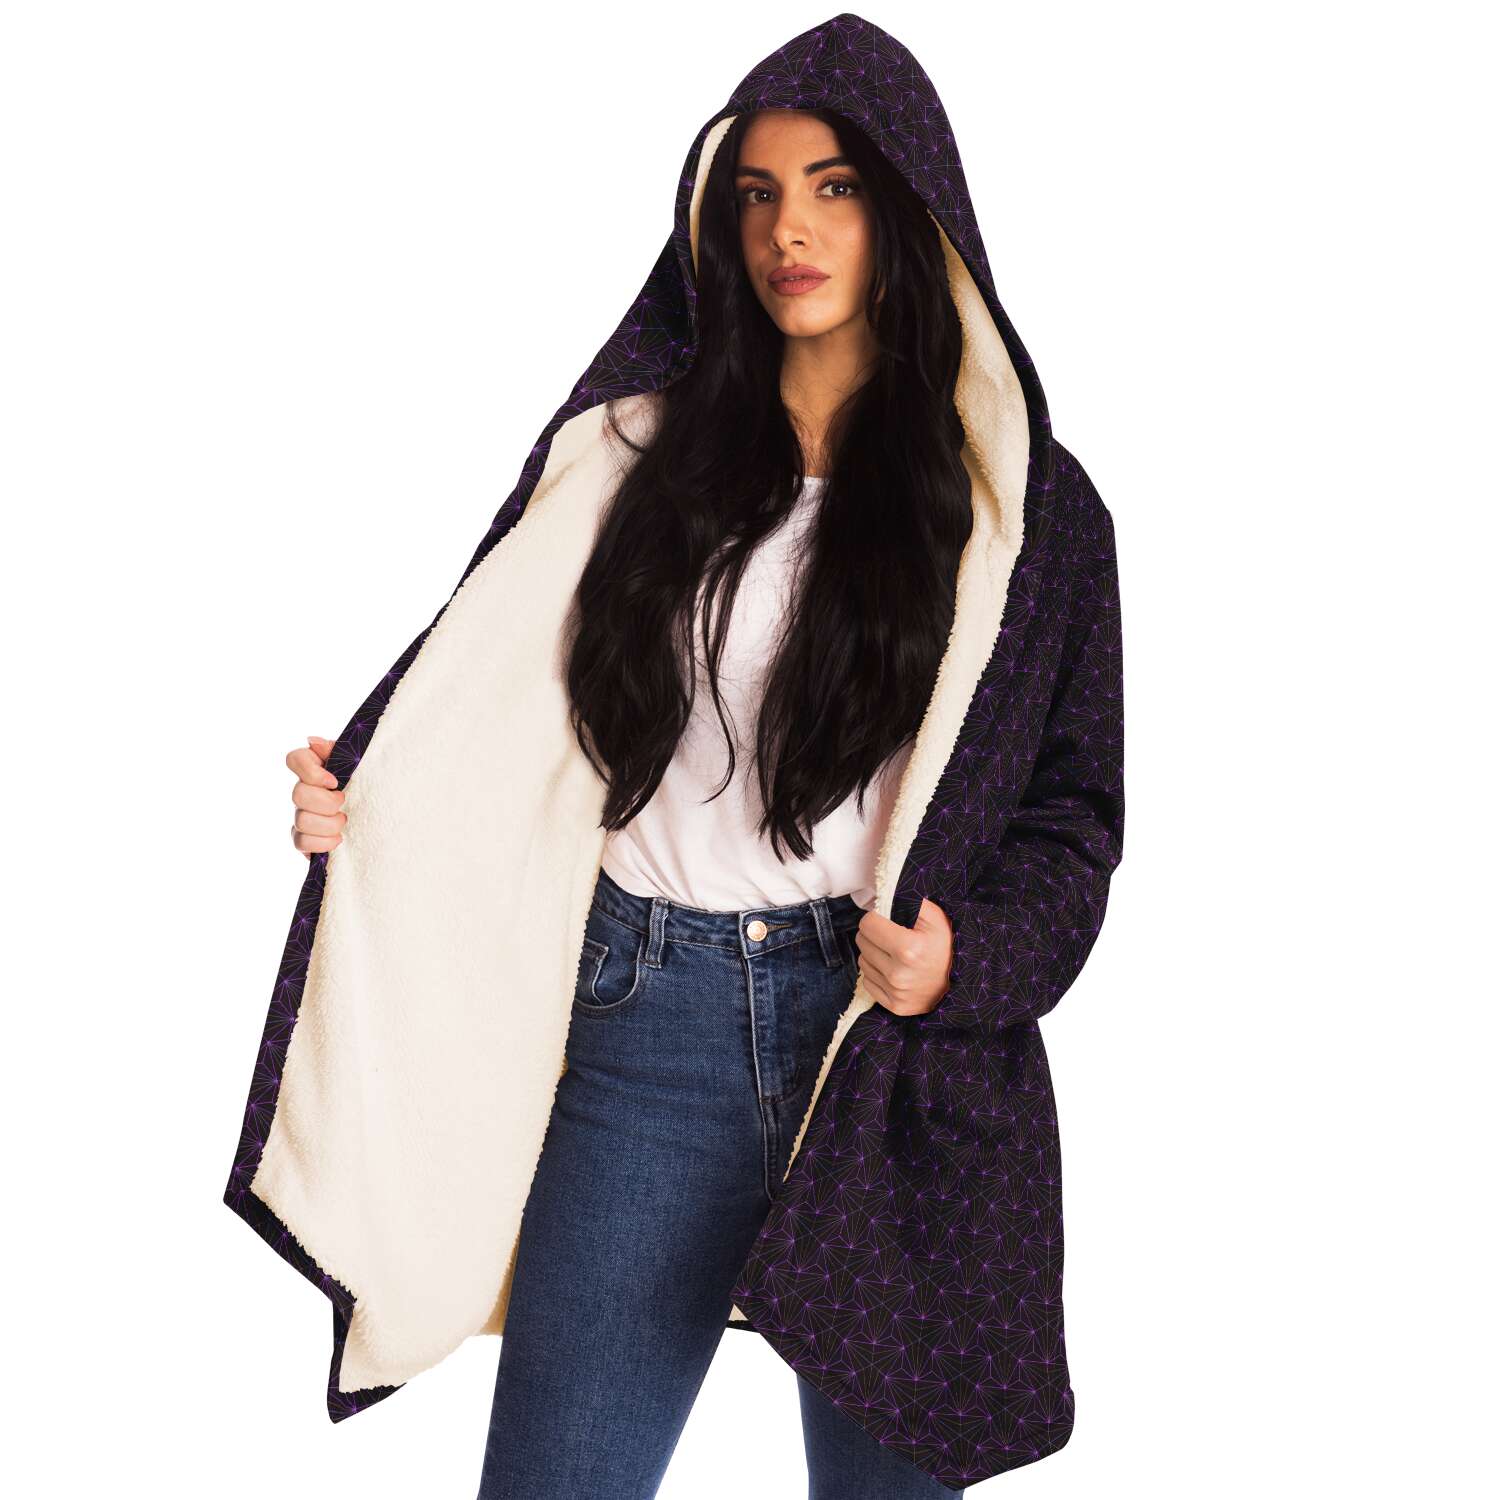 Amethyst Sacred Connections Premium Sherpa Cloak